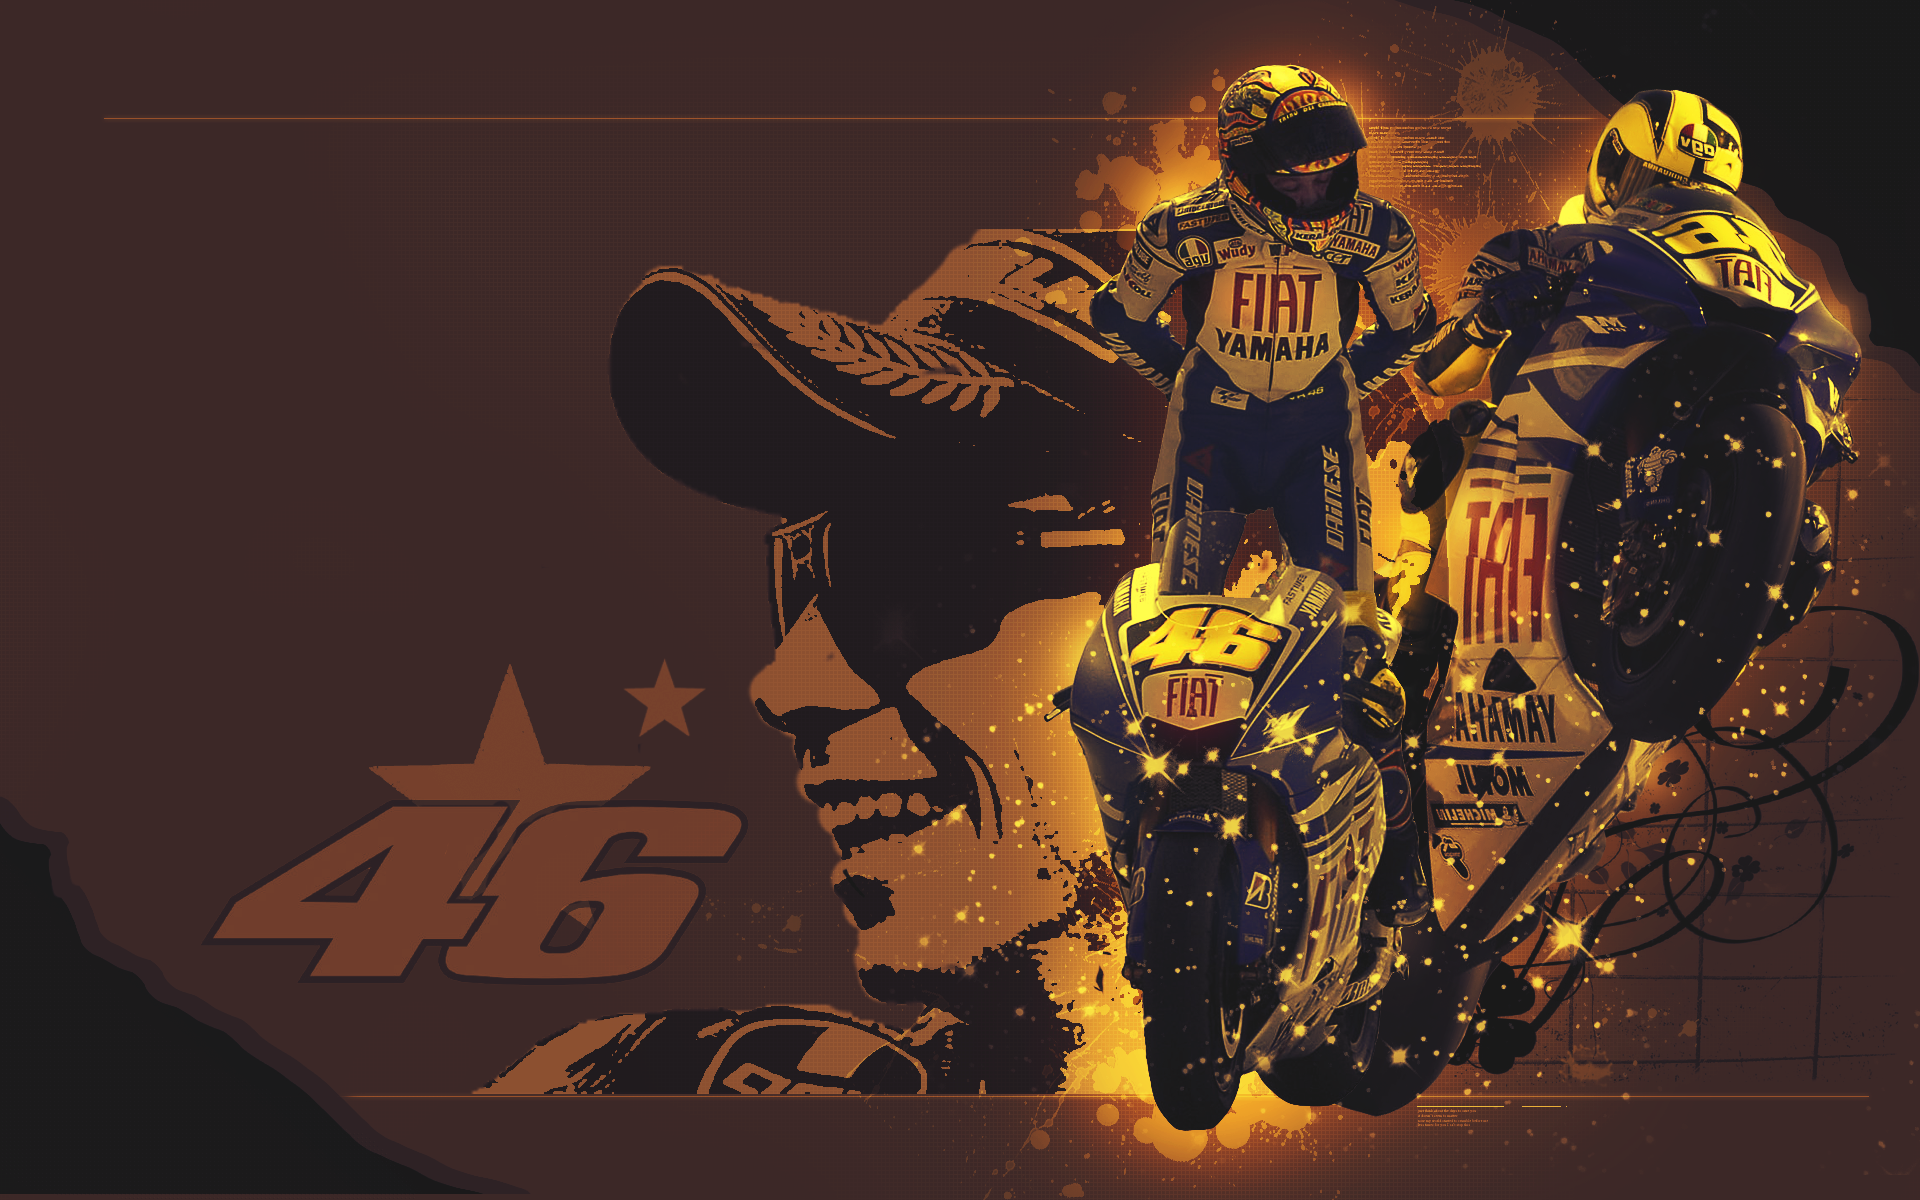 Valentino Rossi Image Vr HD Wallpaper And Background